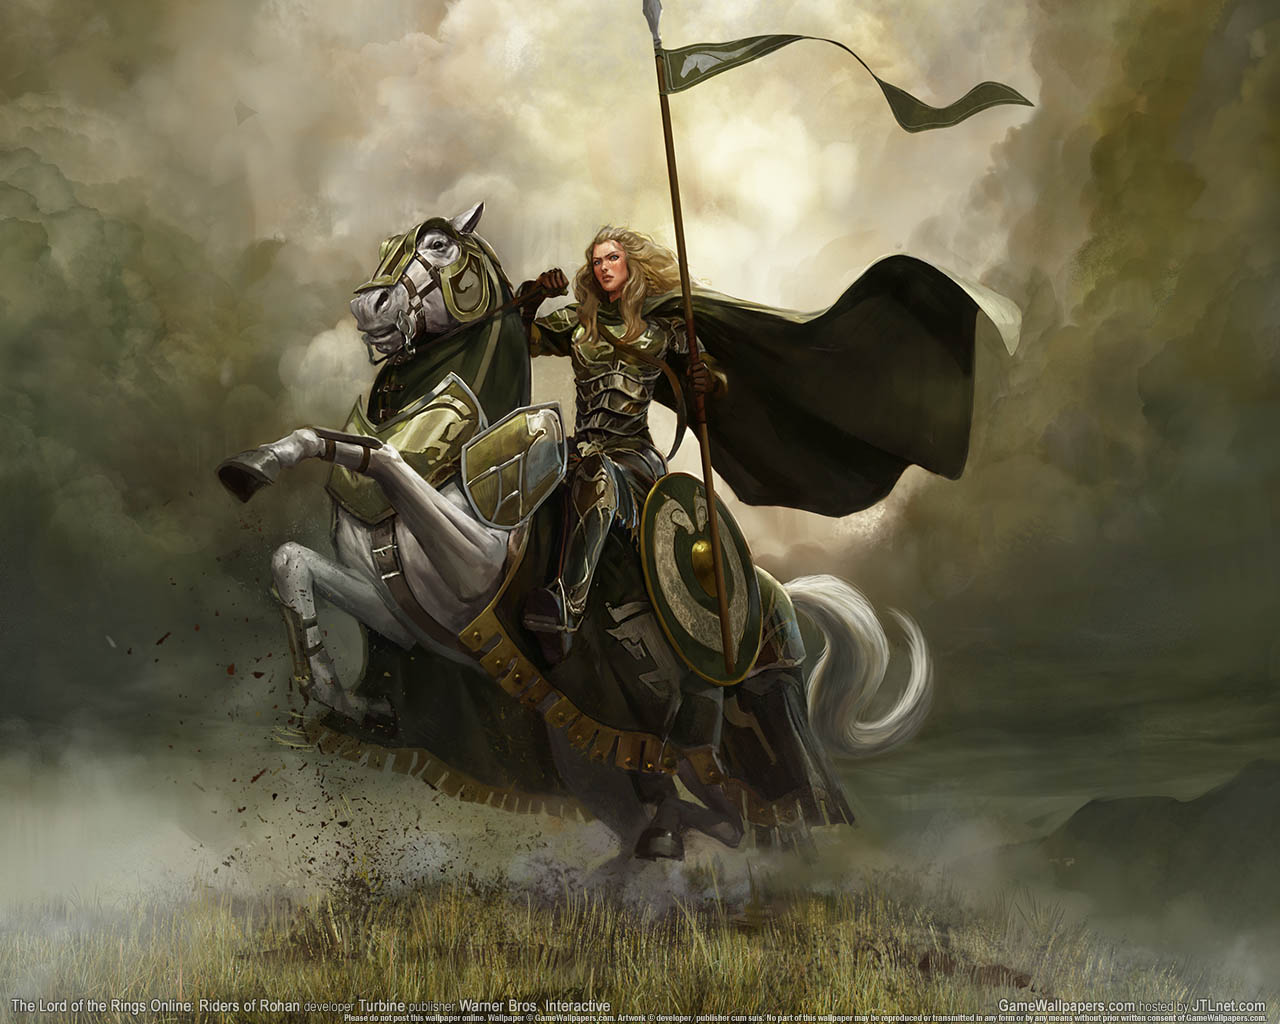 The Lord of the Rings Online: Riders of Rohan wallpaper 02 1280x1024